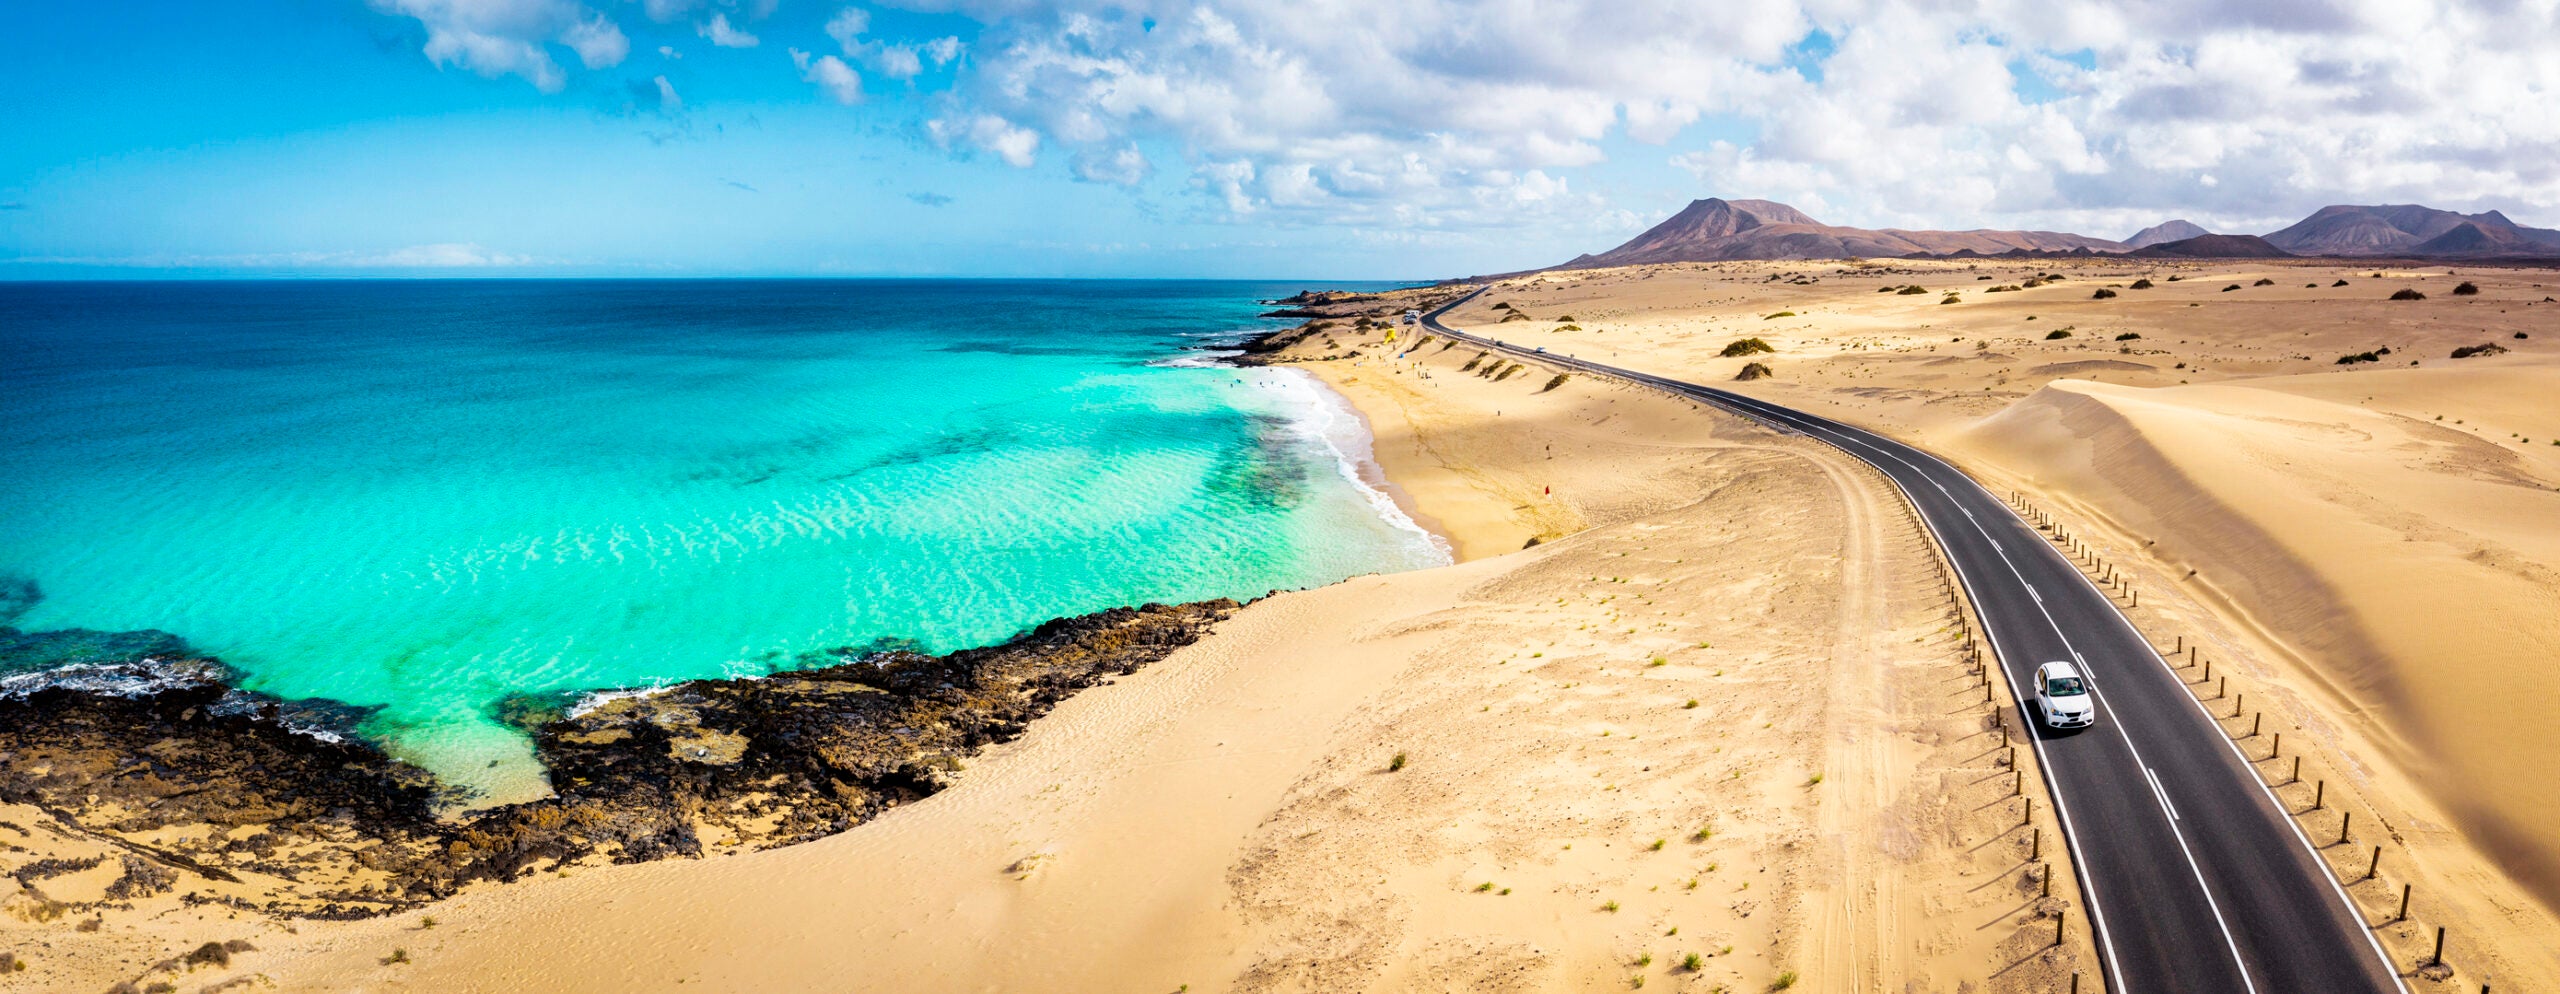 canary islands best island to visit